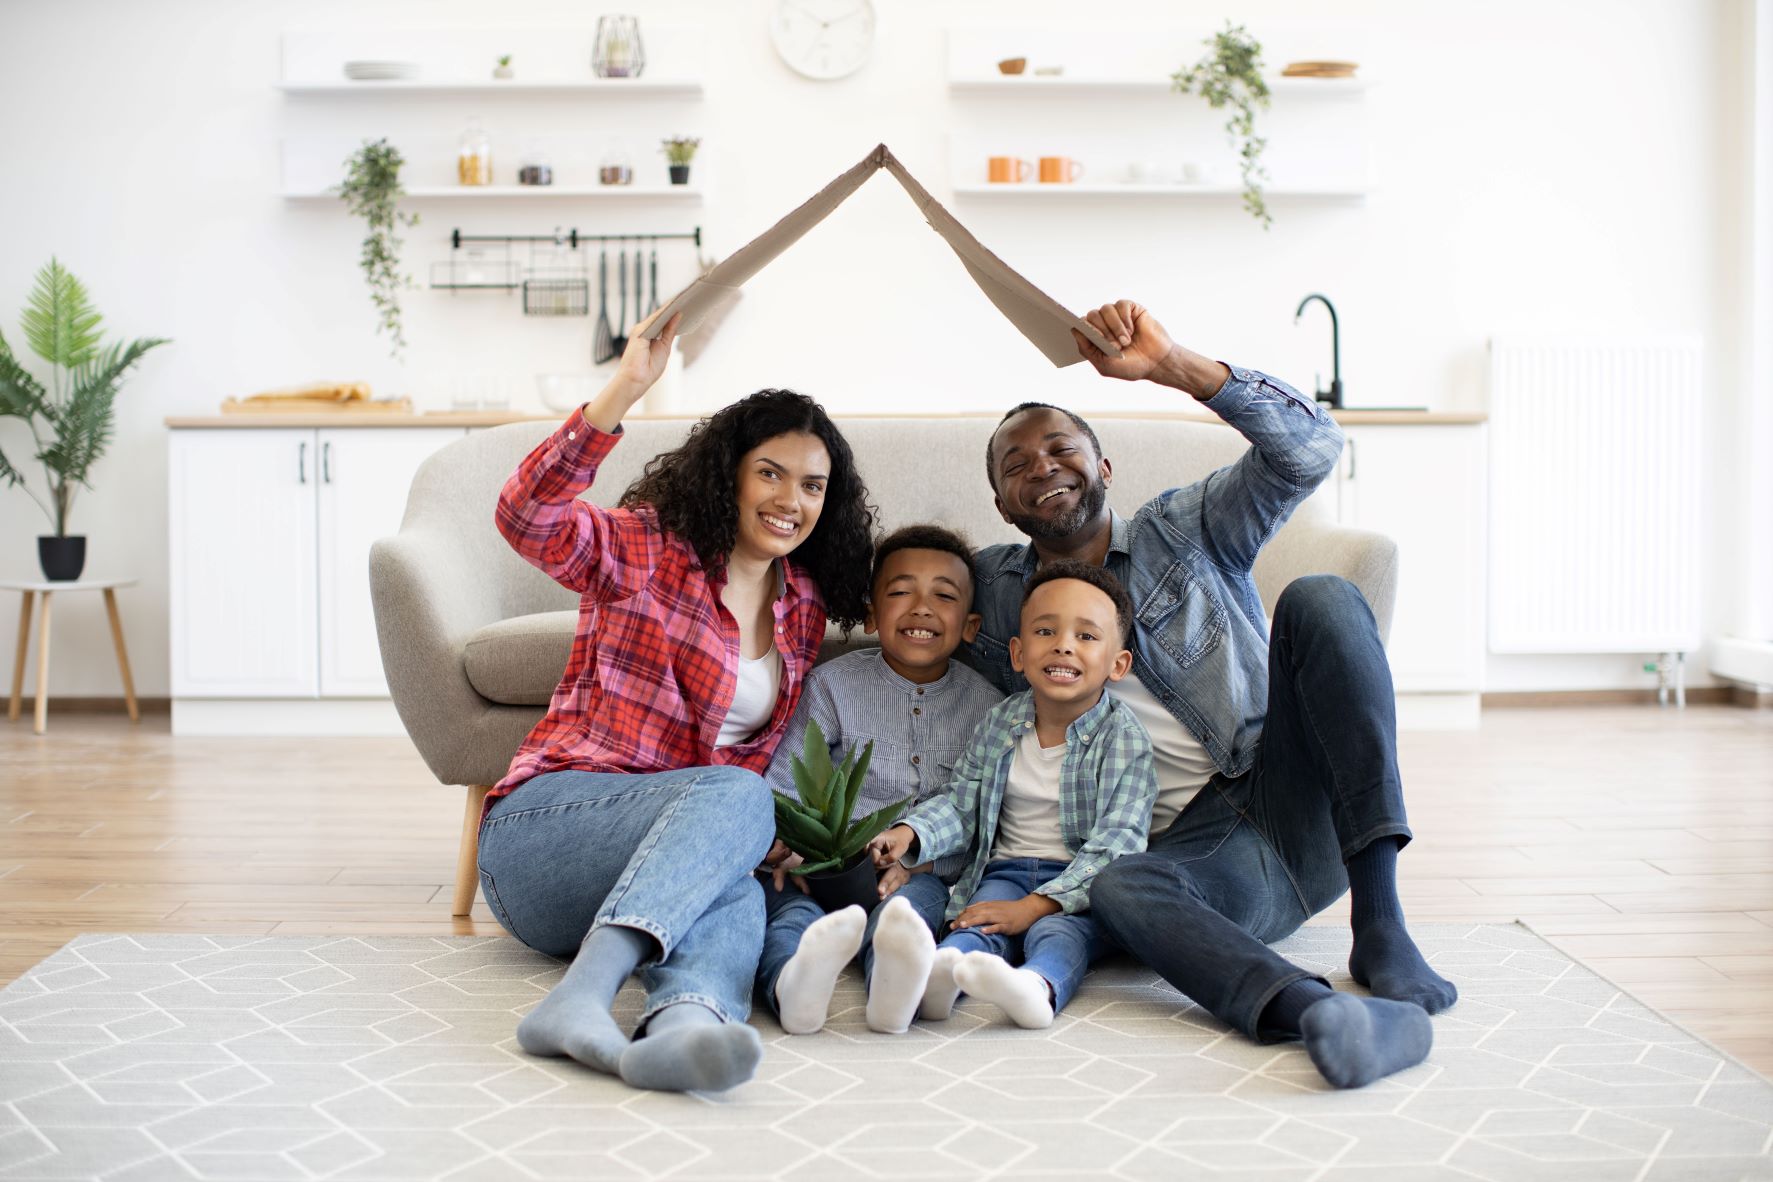 family of four sitting down together in their living room; parents on the ends are holding up a triangle of cardboard to emulate a home over their heads